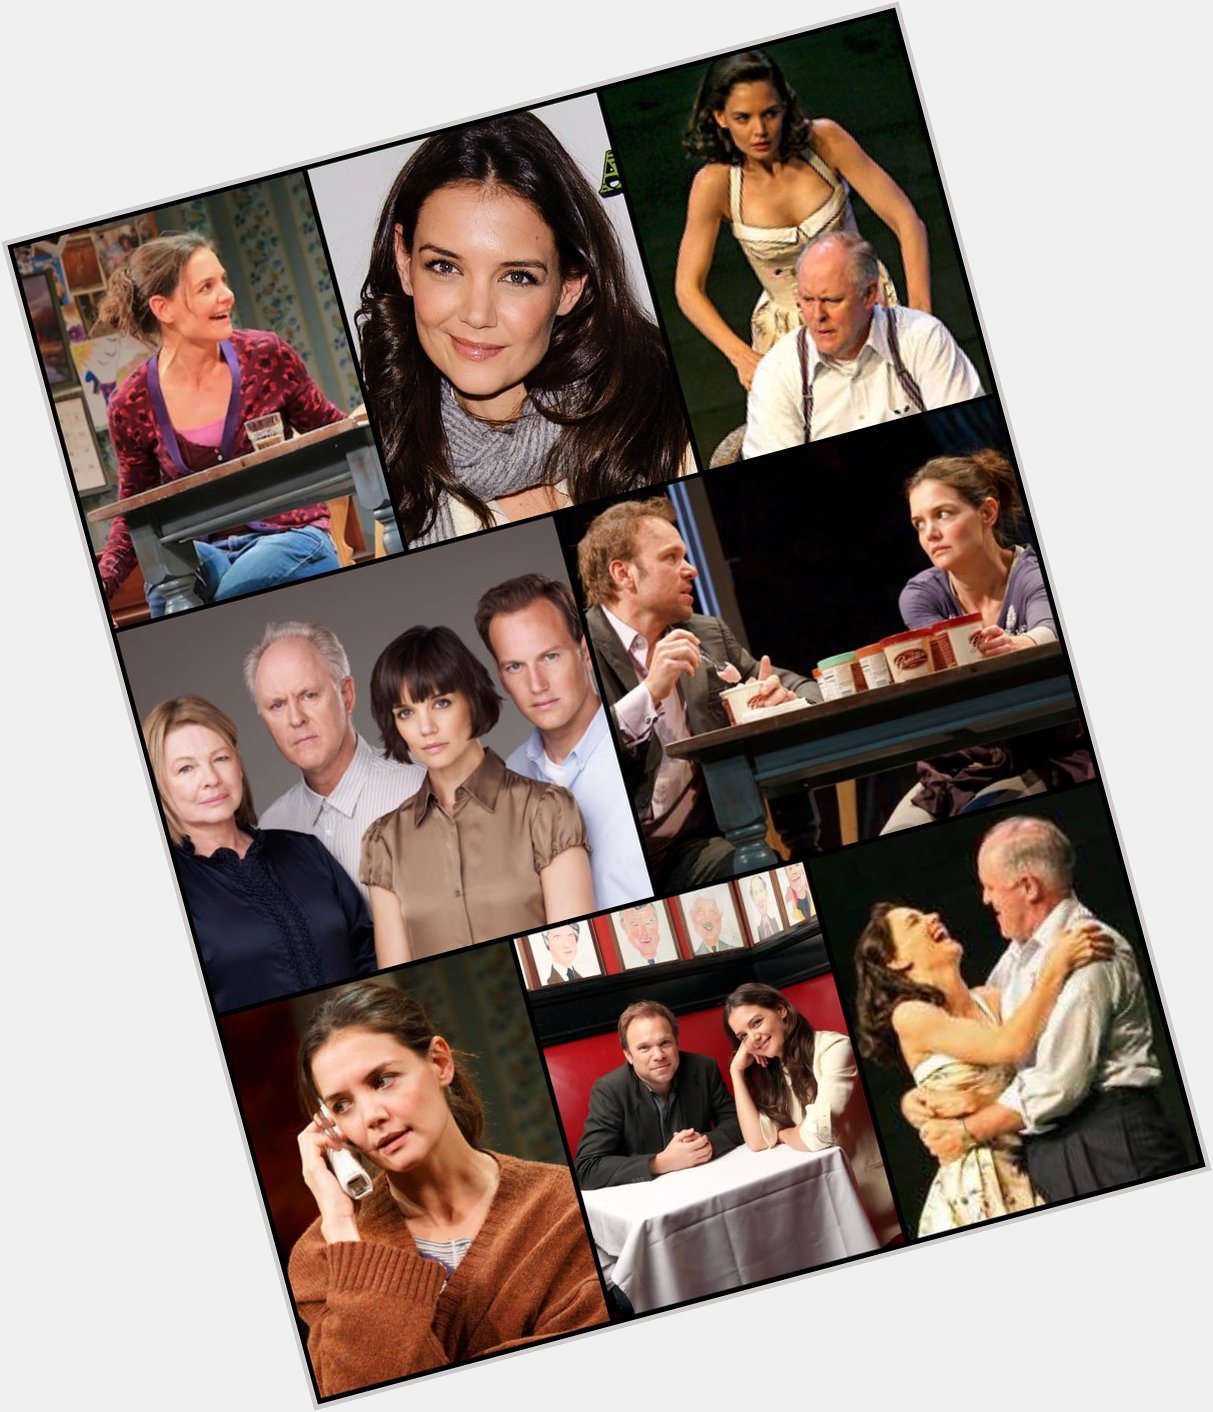 Sending out a Happy Birthday to Katie Holmes, who starred on Broadway in All My Sons and Dead Accounts! ^Ricky 